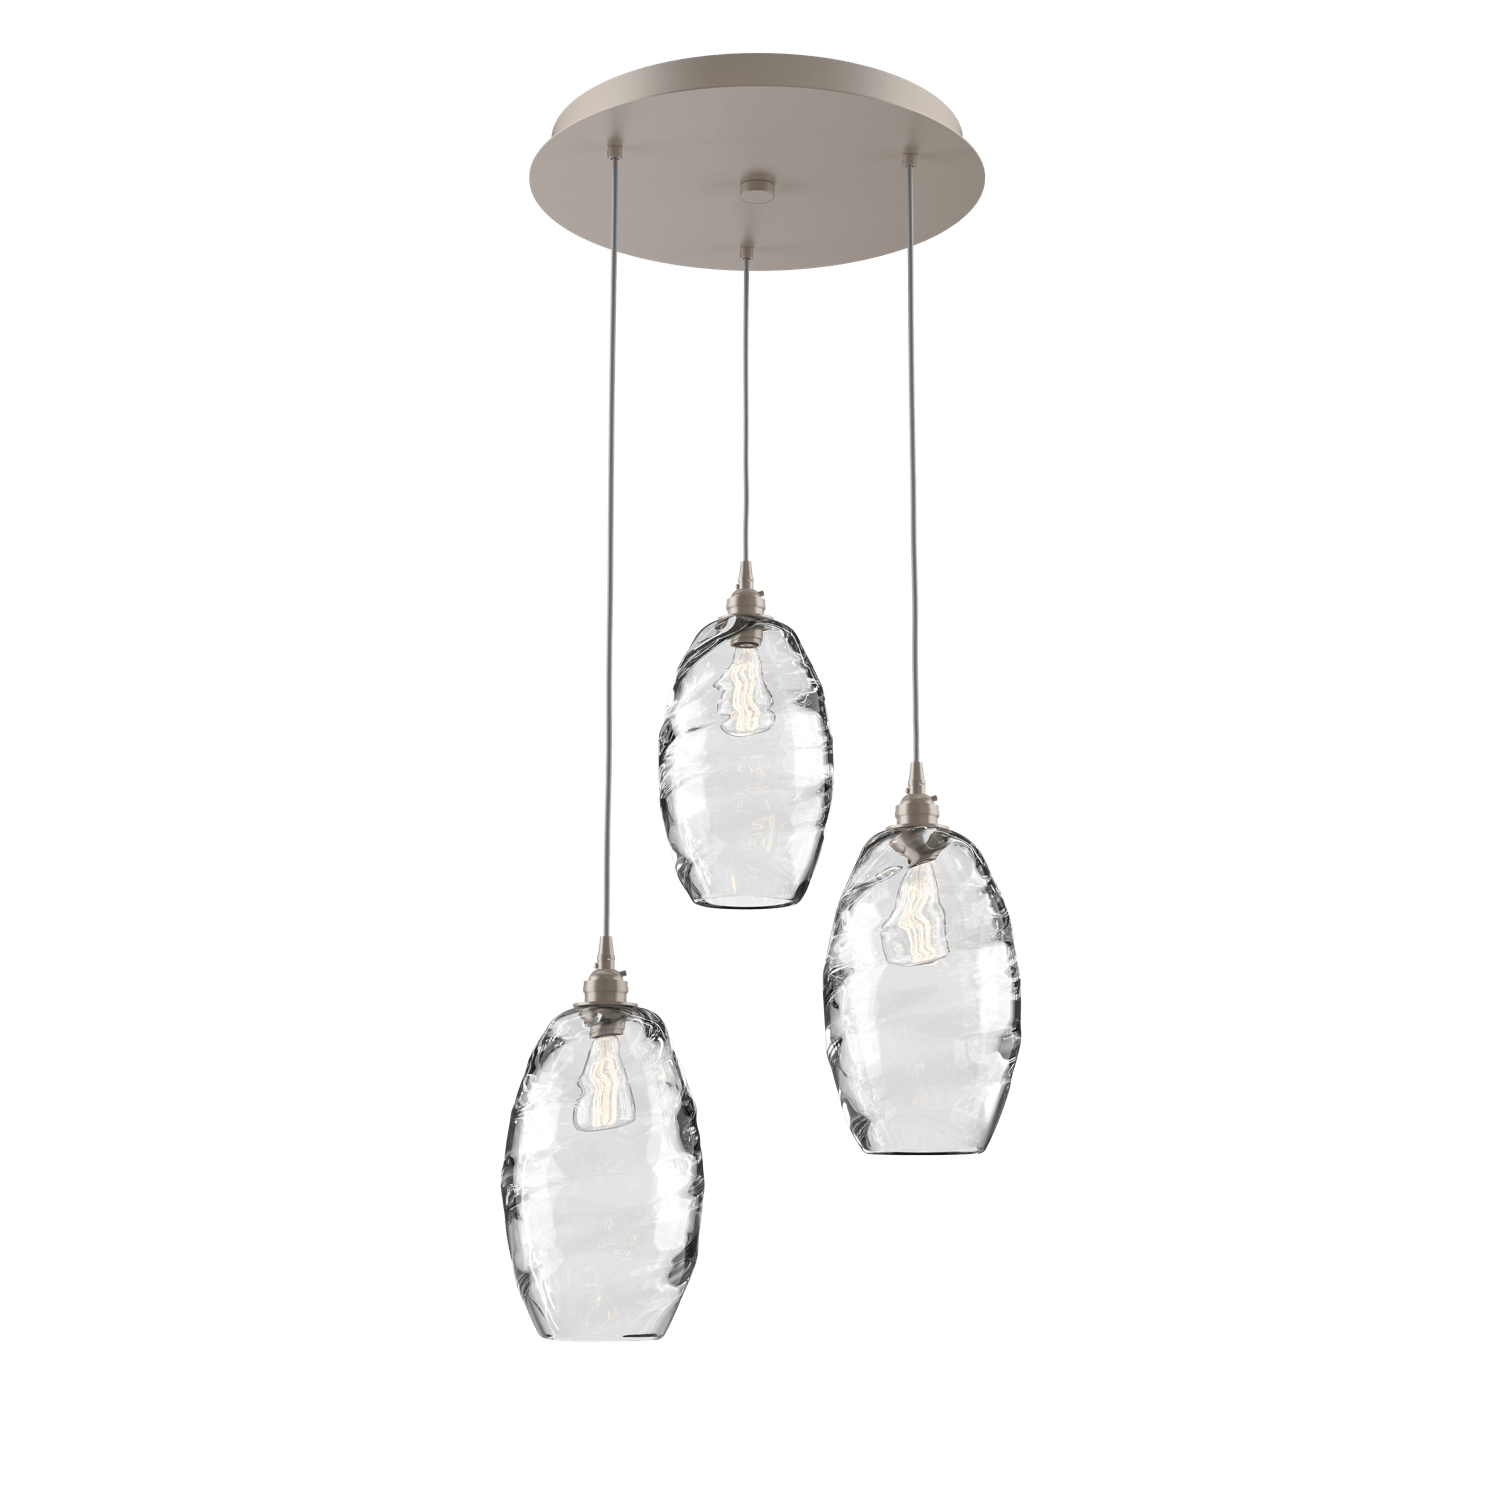 CHB0035-03-BS-OC-Hammerton-Studio-Optic-Blown-Glass-Elisse-3-light-round-pendant-chandelier-with-metallic-beige-silver-finish-and-optic-clear-blown-glass-shades-and-incandescent-lamping